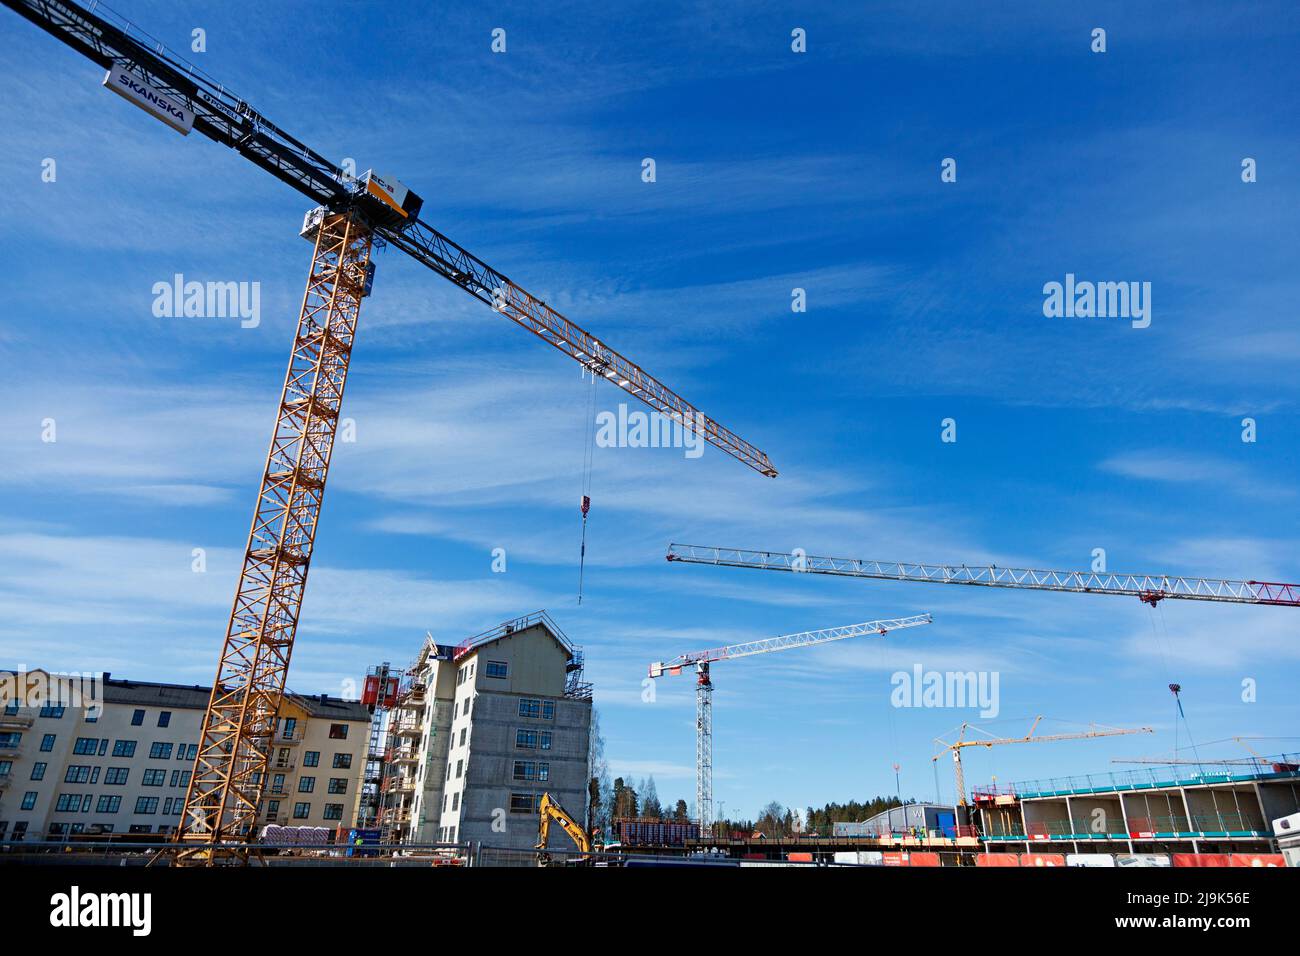 Umea, Norrland Sweden - May 13, 2022: four cranes during housing construction on Teg Stock Photo